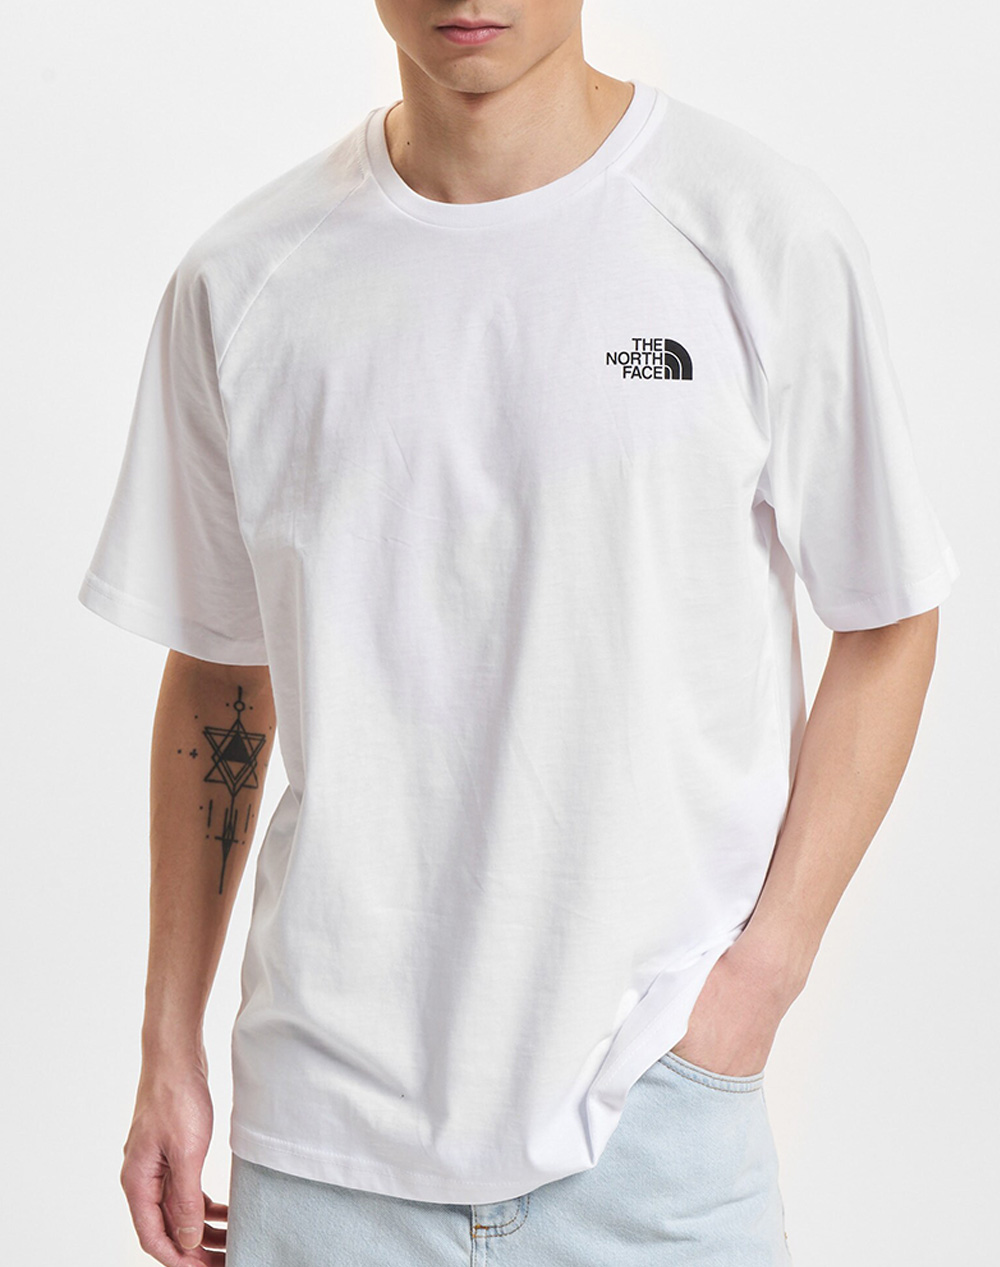 THE NORTH FACE M S/S NORTH FACES TEE NF0A87NU-NFFN4 White